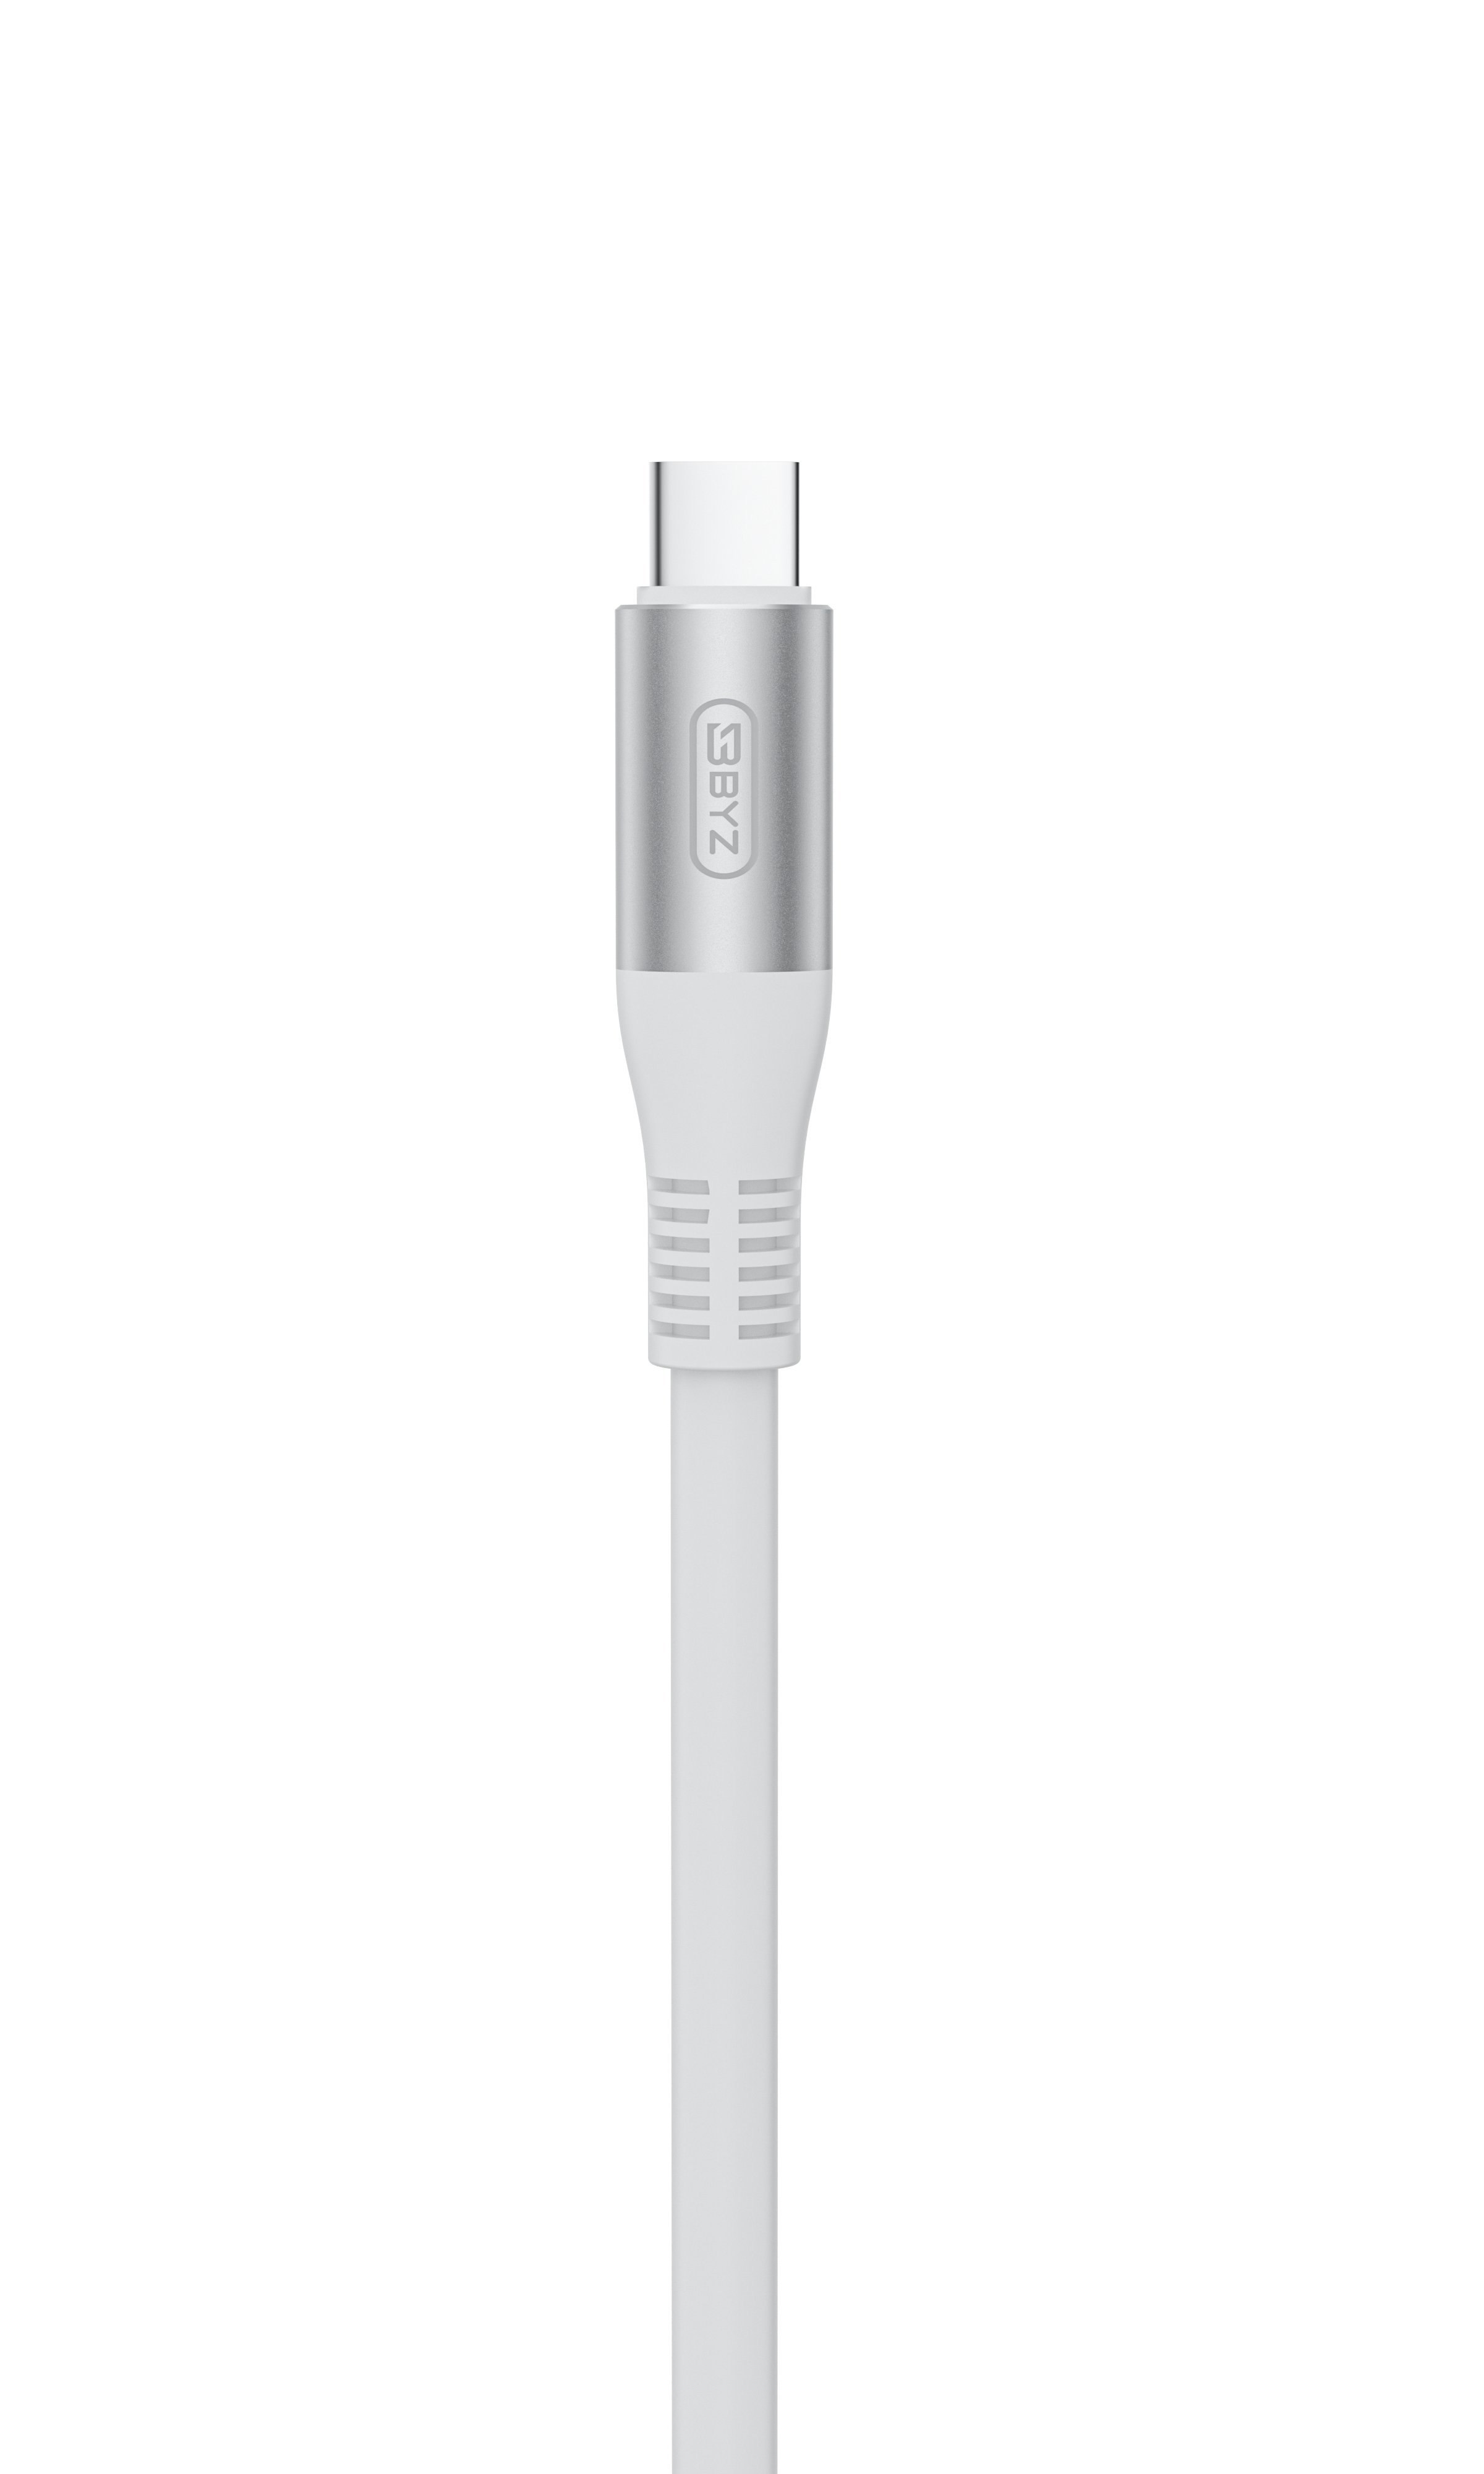 lightning fast charging cable; mobile charging cable; charging cable factory; fast charging cable; wholesale lightning cables